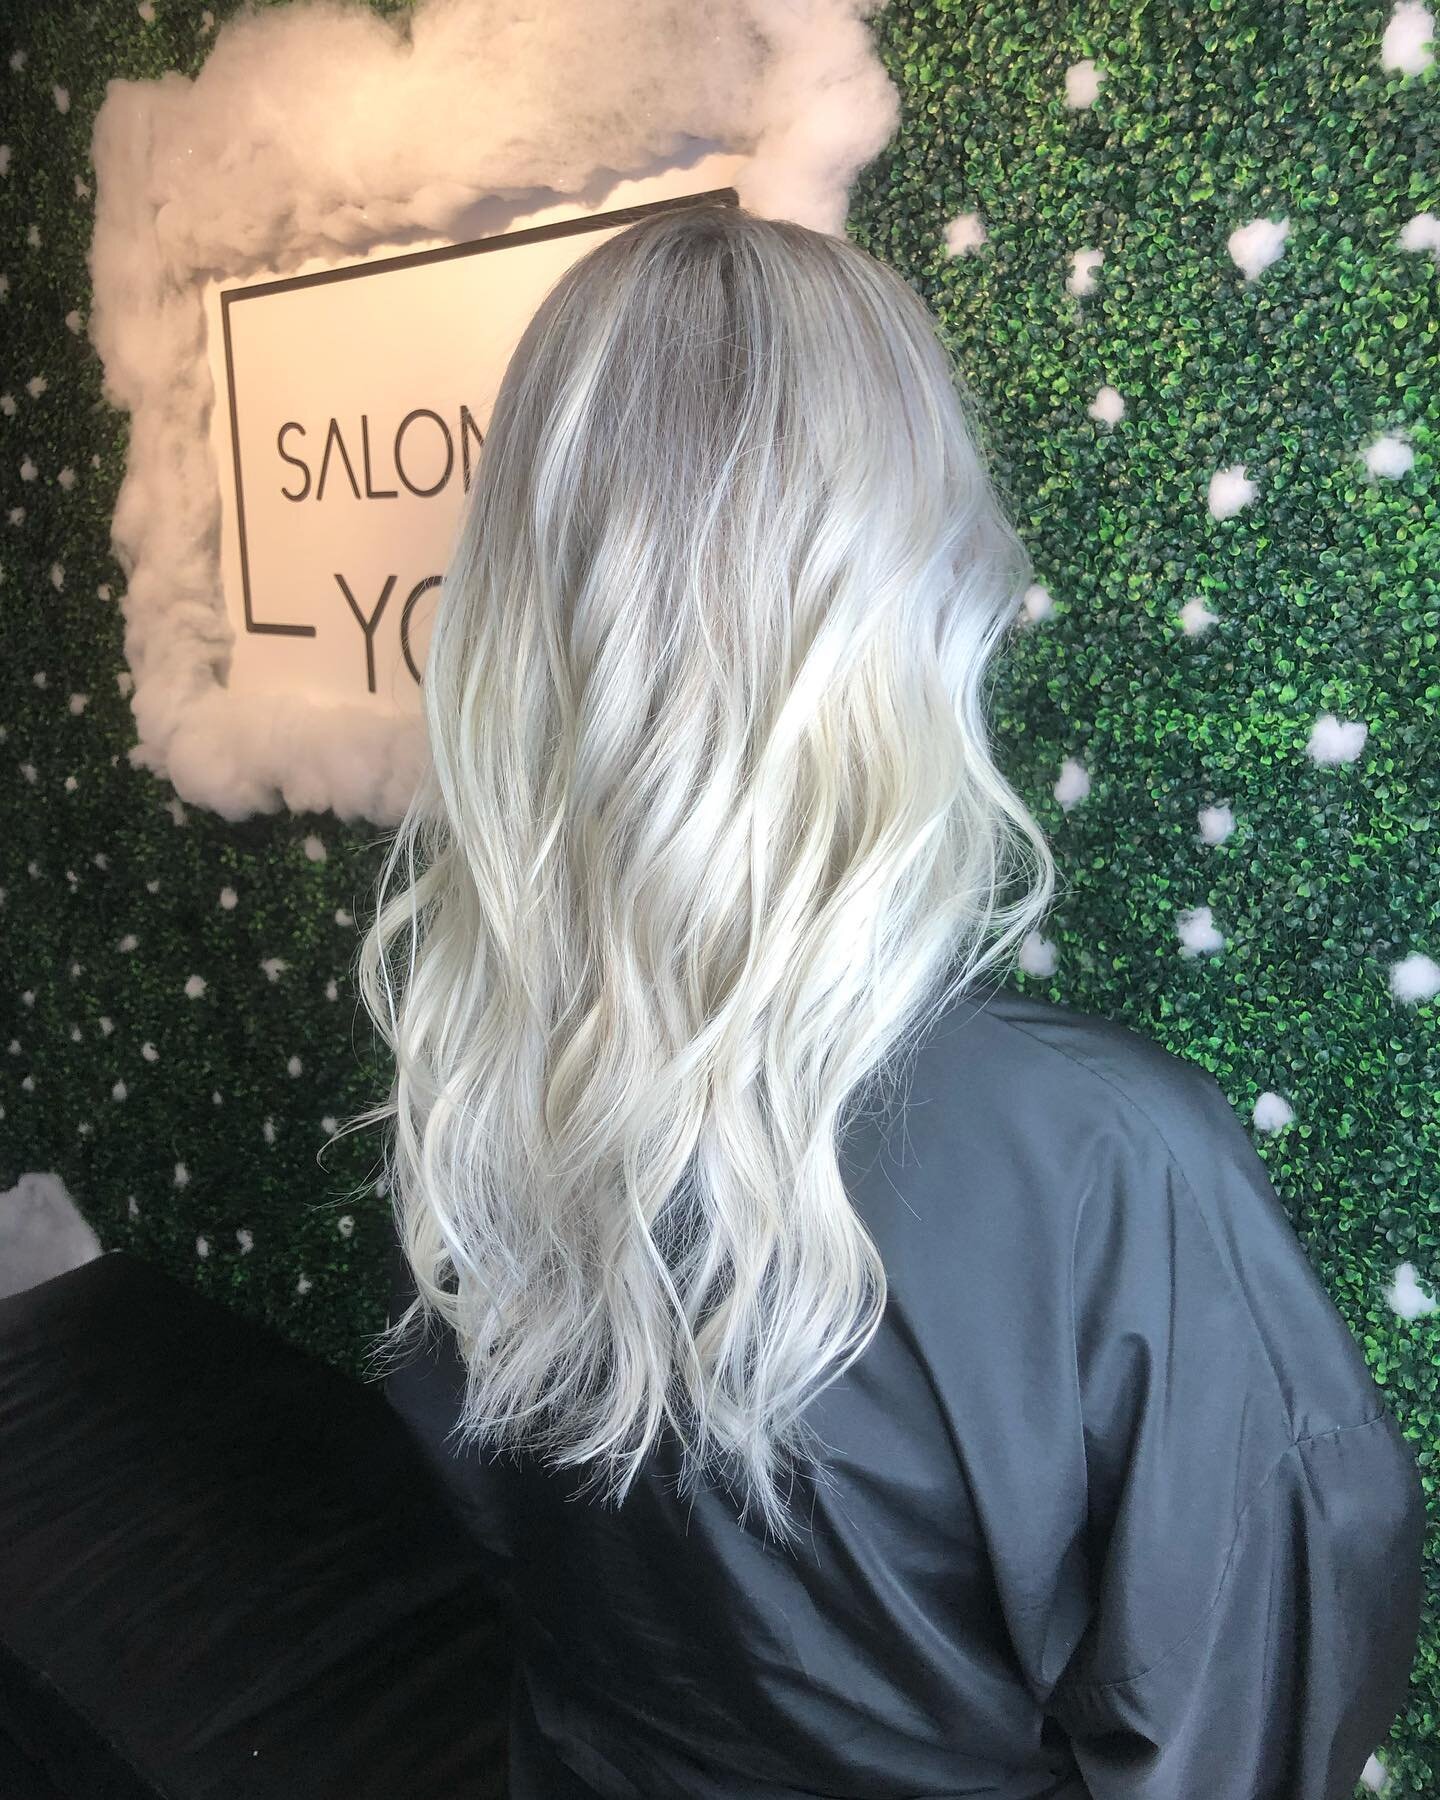 WHITE Christmas 🎄 
Hair done by @hairbymosescho 

#salonbyyoo #onlyou

For customer satisfaction, a 1:1 consultation will be performed before any service.

For appointment/consultation
DM / call at 8089551600
Email info@salonbyyoo.com
Www.salonbyyoo